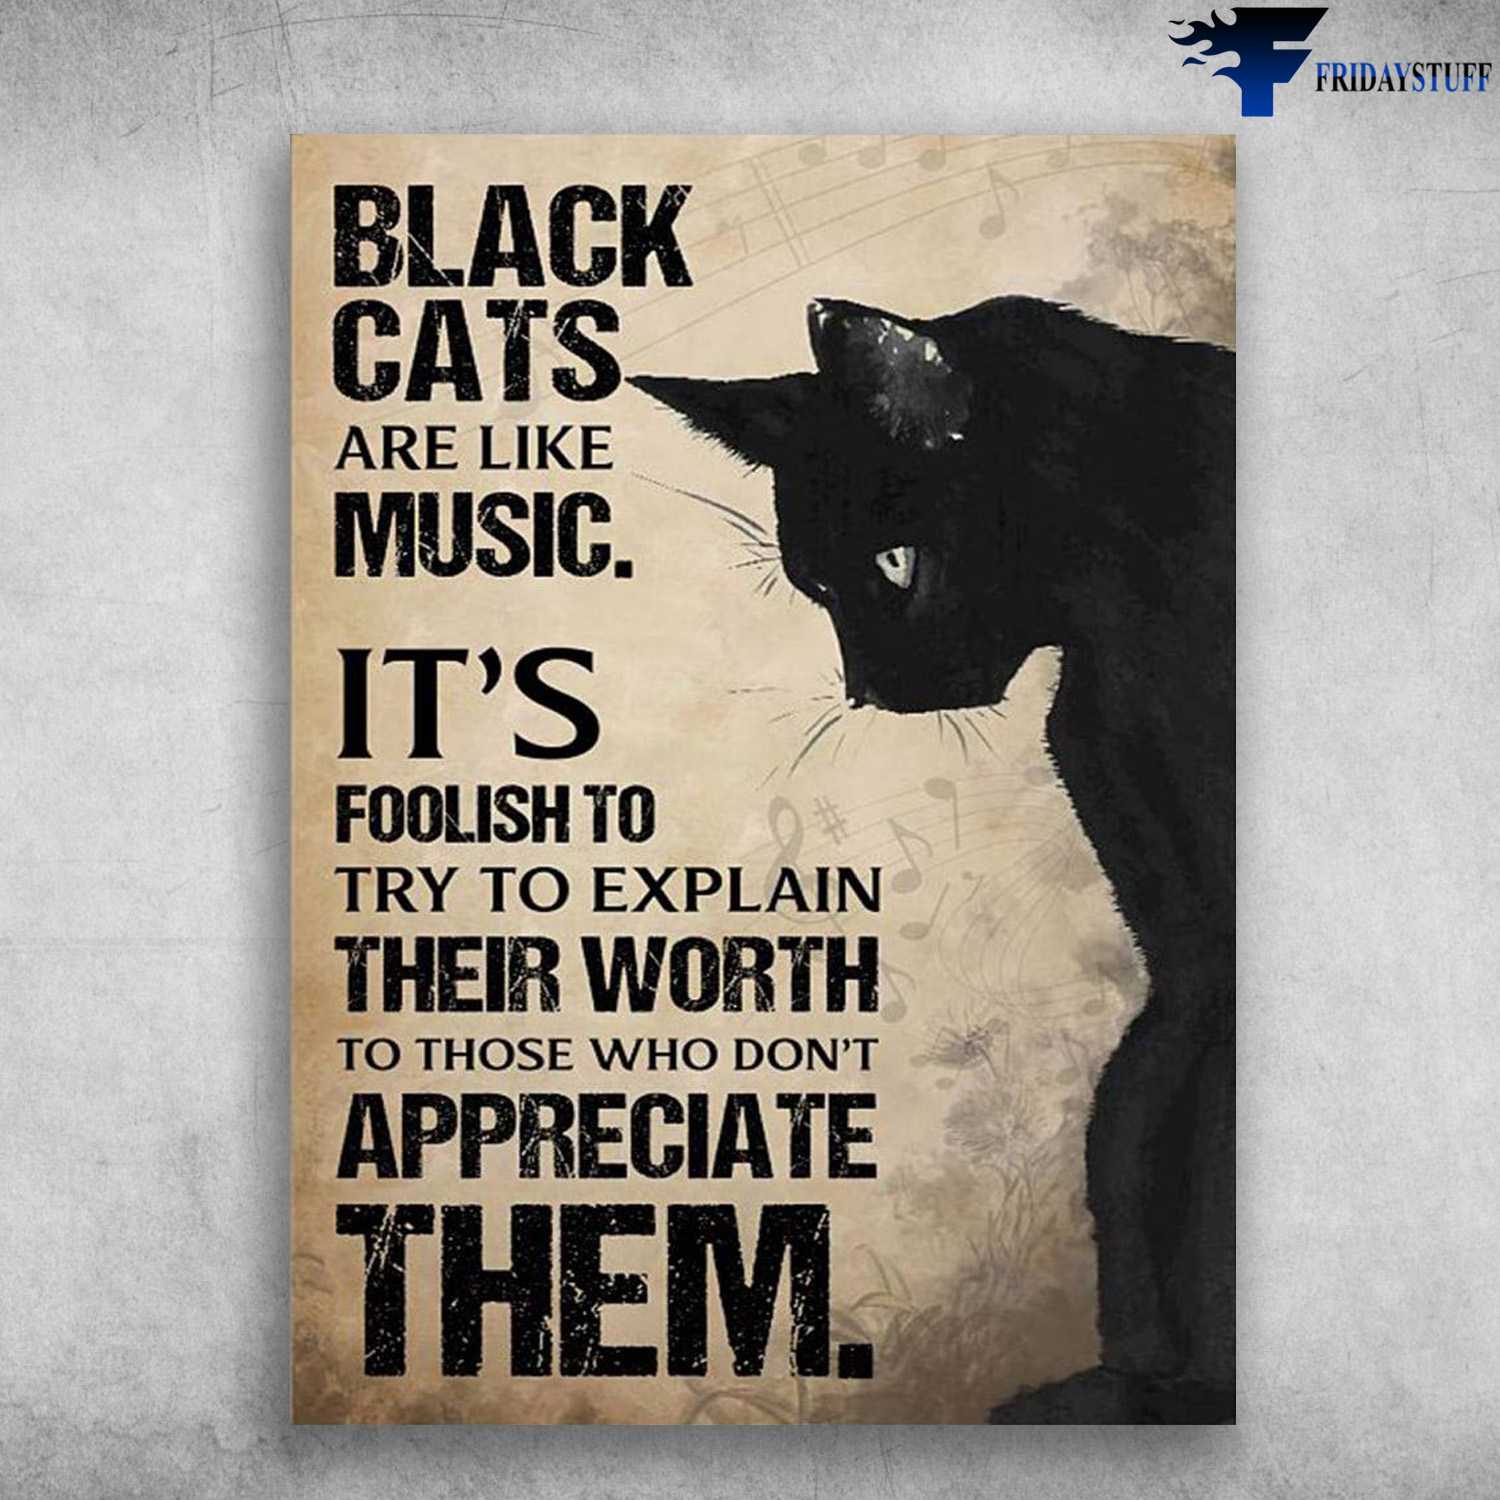 Black Cat Poster, Black Cats Are Like Mucis, It's Foolish To Try, To Explain Their Worth, To Those Who Don't Appreciate Them